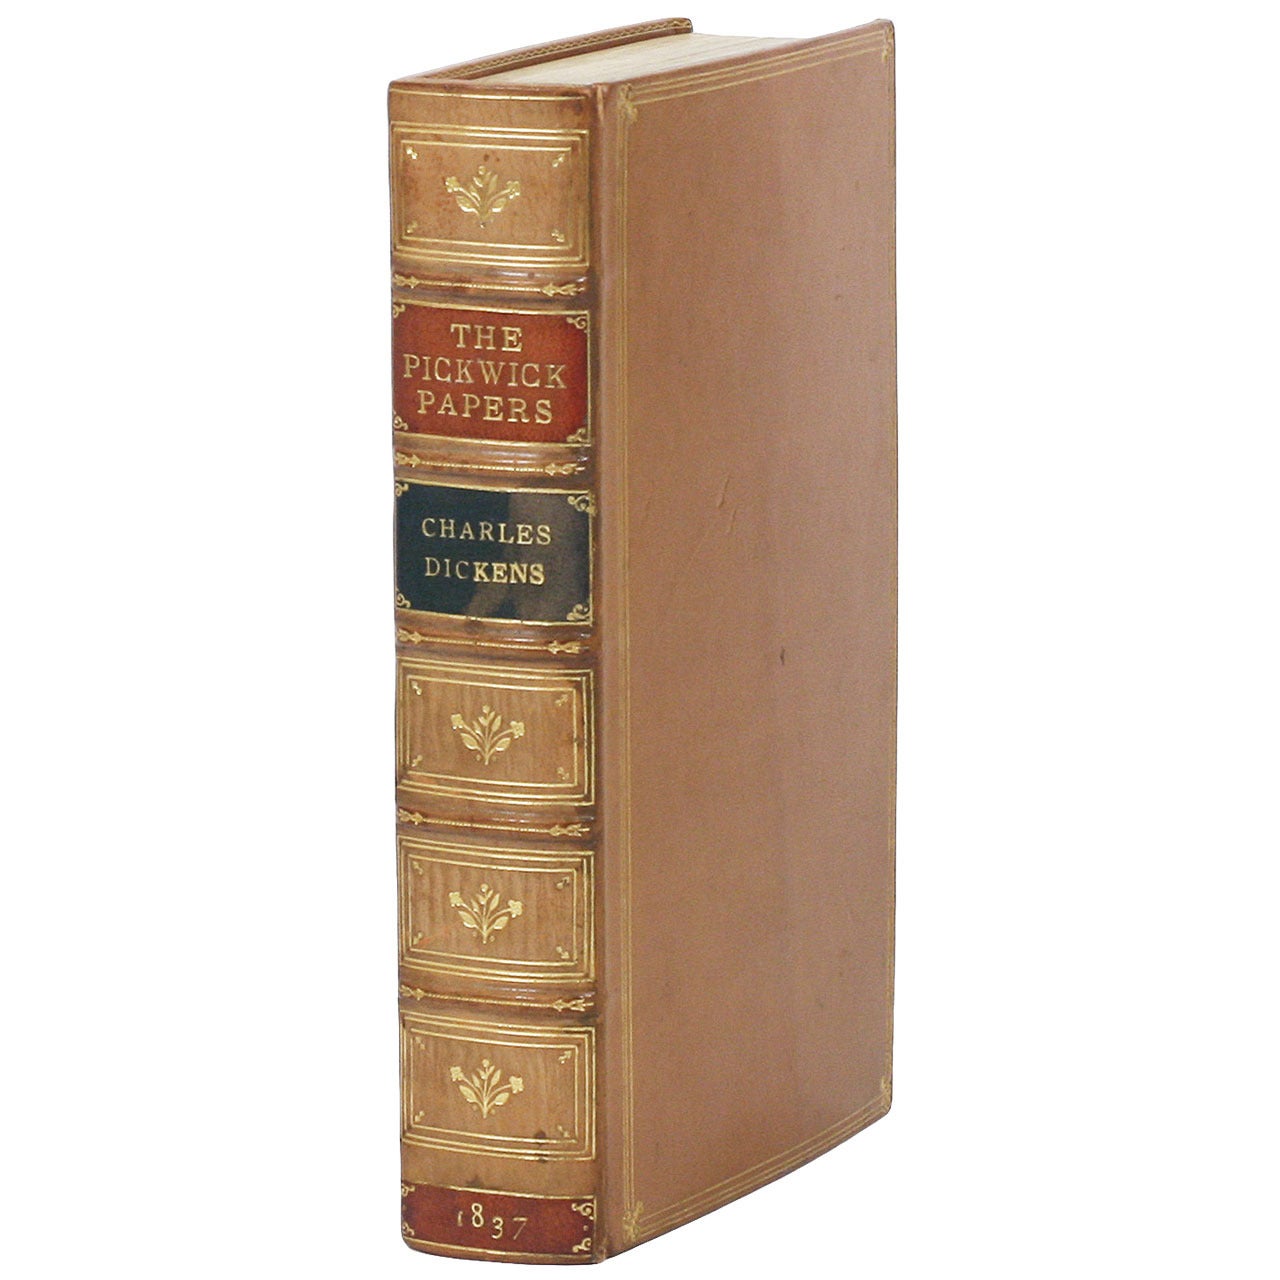 Charles Dickens: Pickwick Papers, First Edition